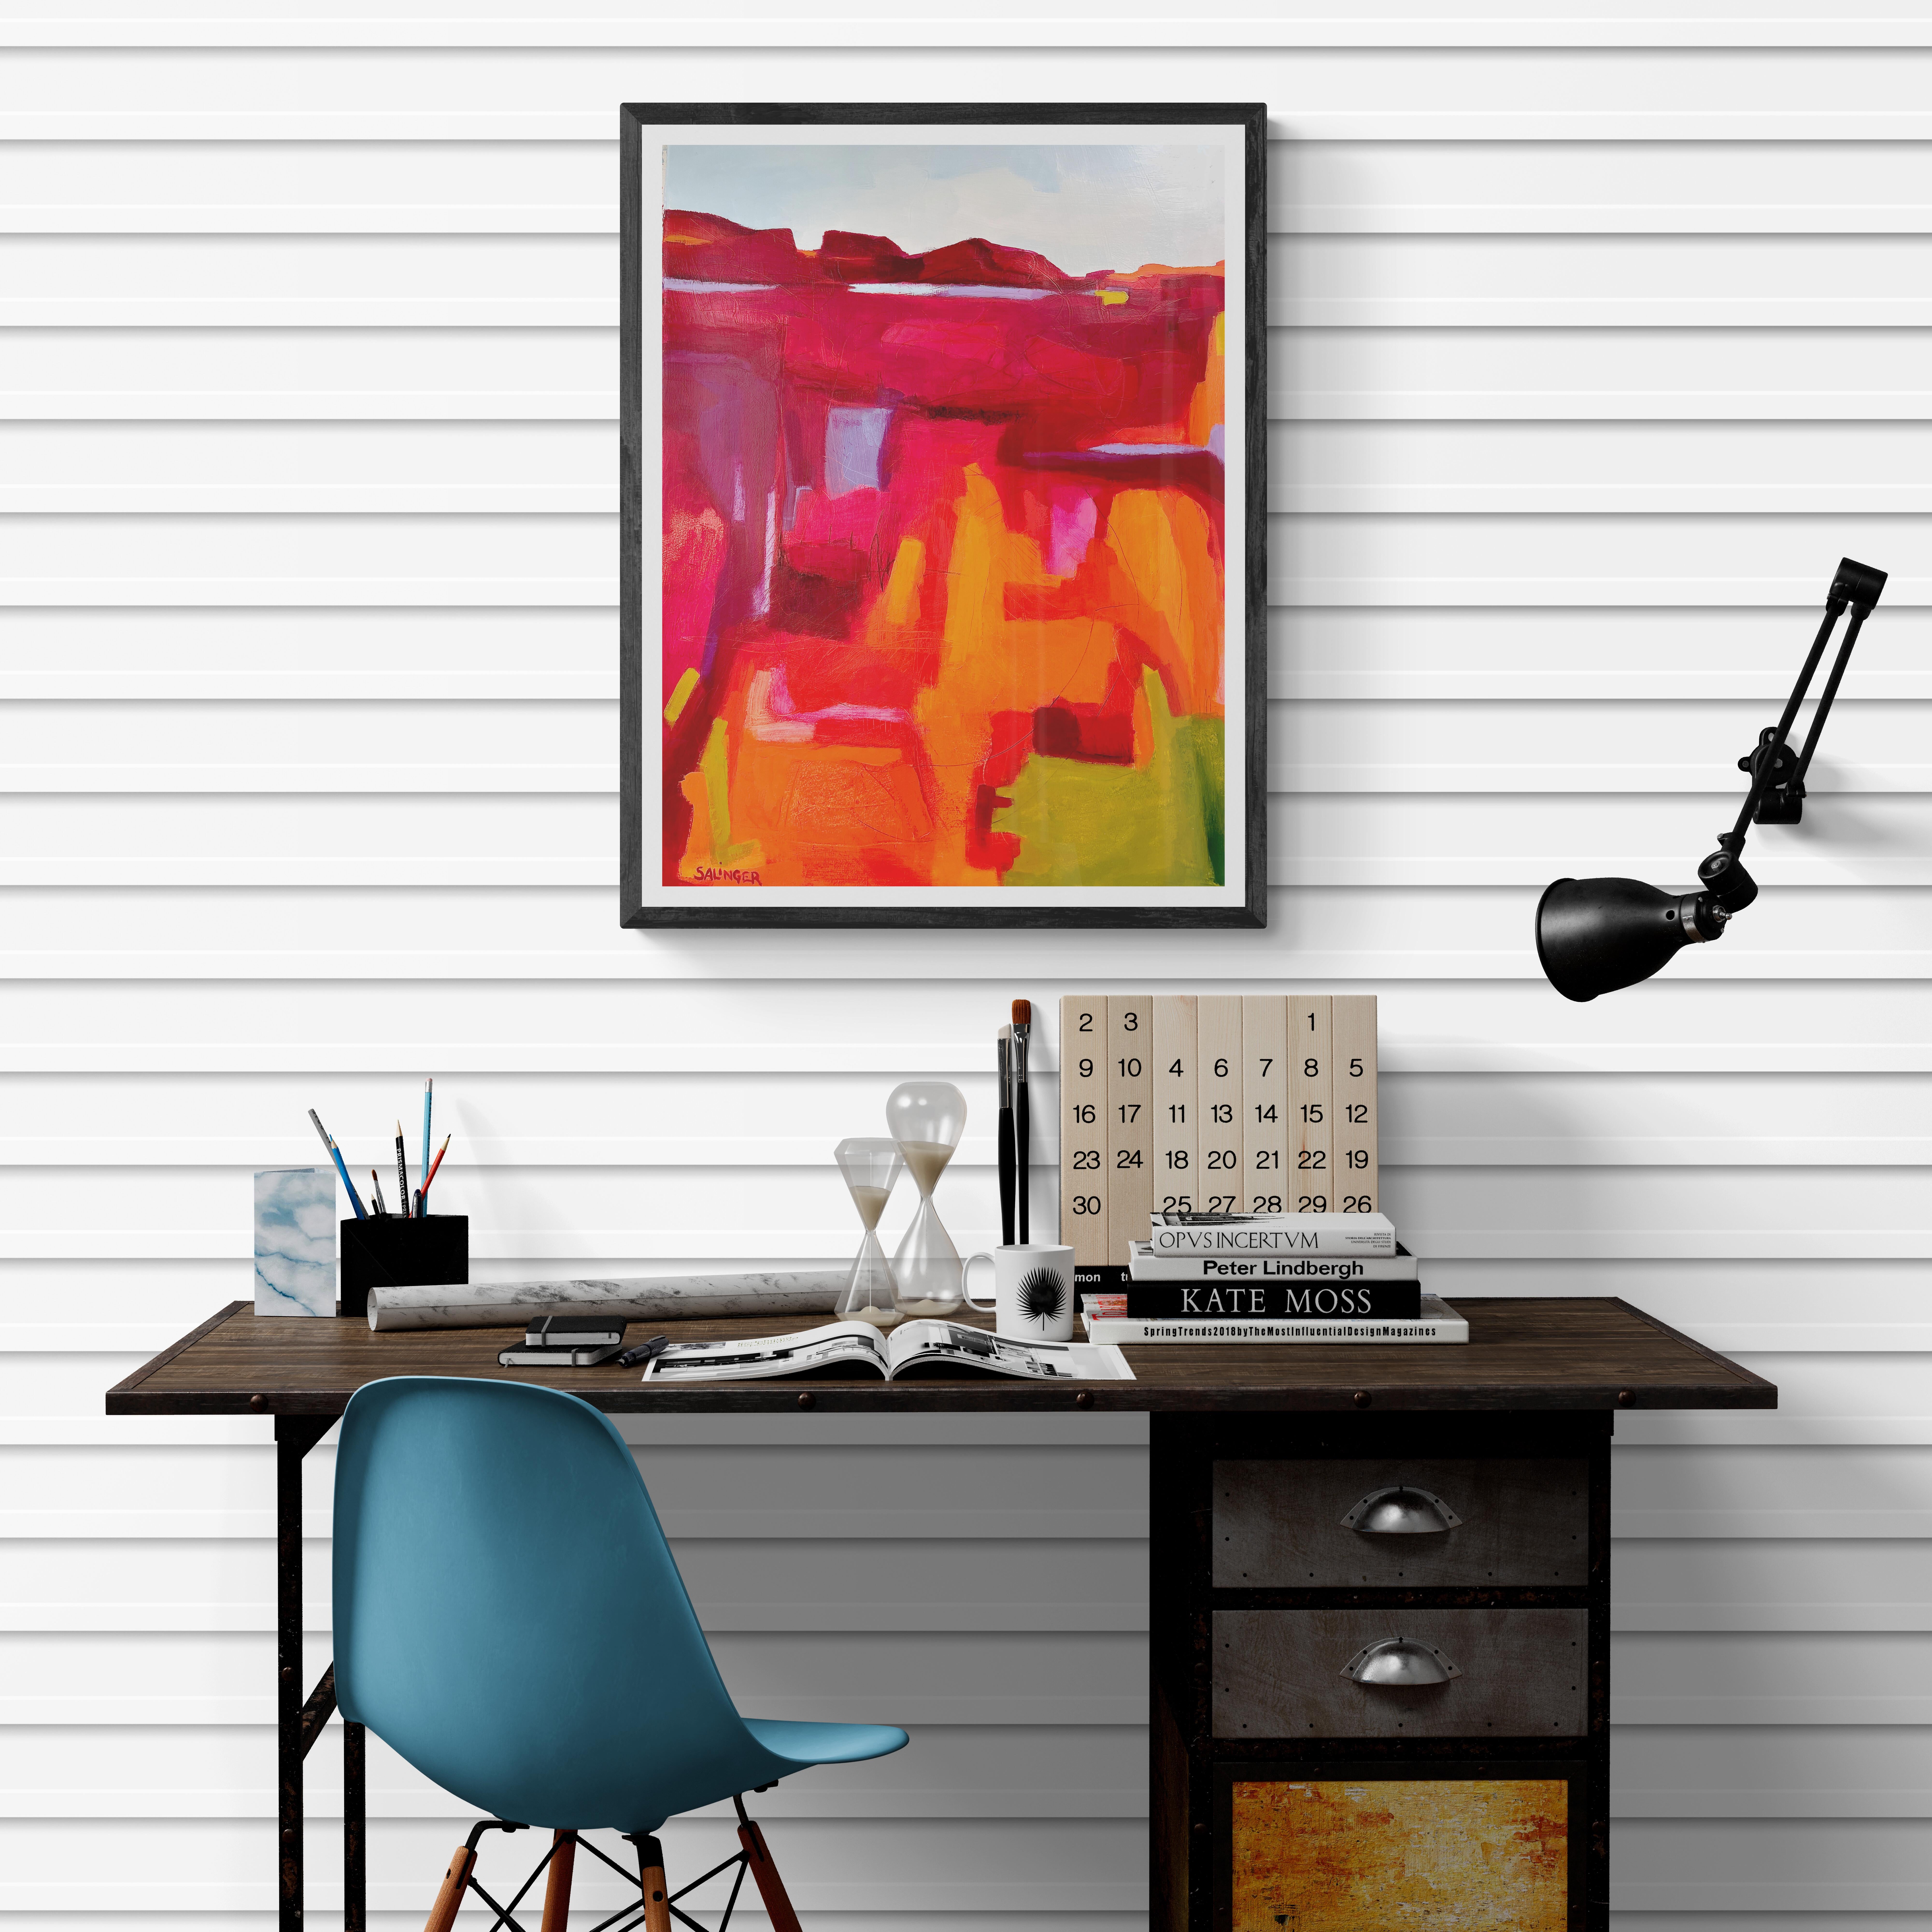 Red Canyon, Original Signed Colorful Fauvism Landscape Oil on Paper
22x30 (WxH), Oil Paint
Hand-signed by the artist.

A cross between an abstract painting of geometric forms and a landscape belonging to the fauvism movement, this brightly colored